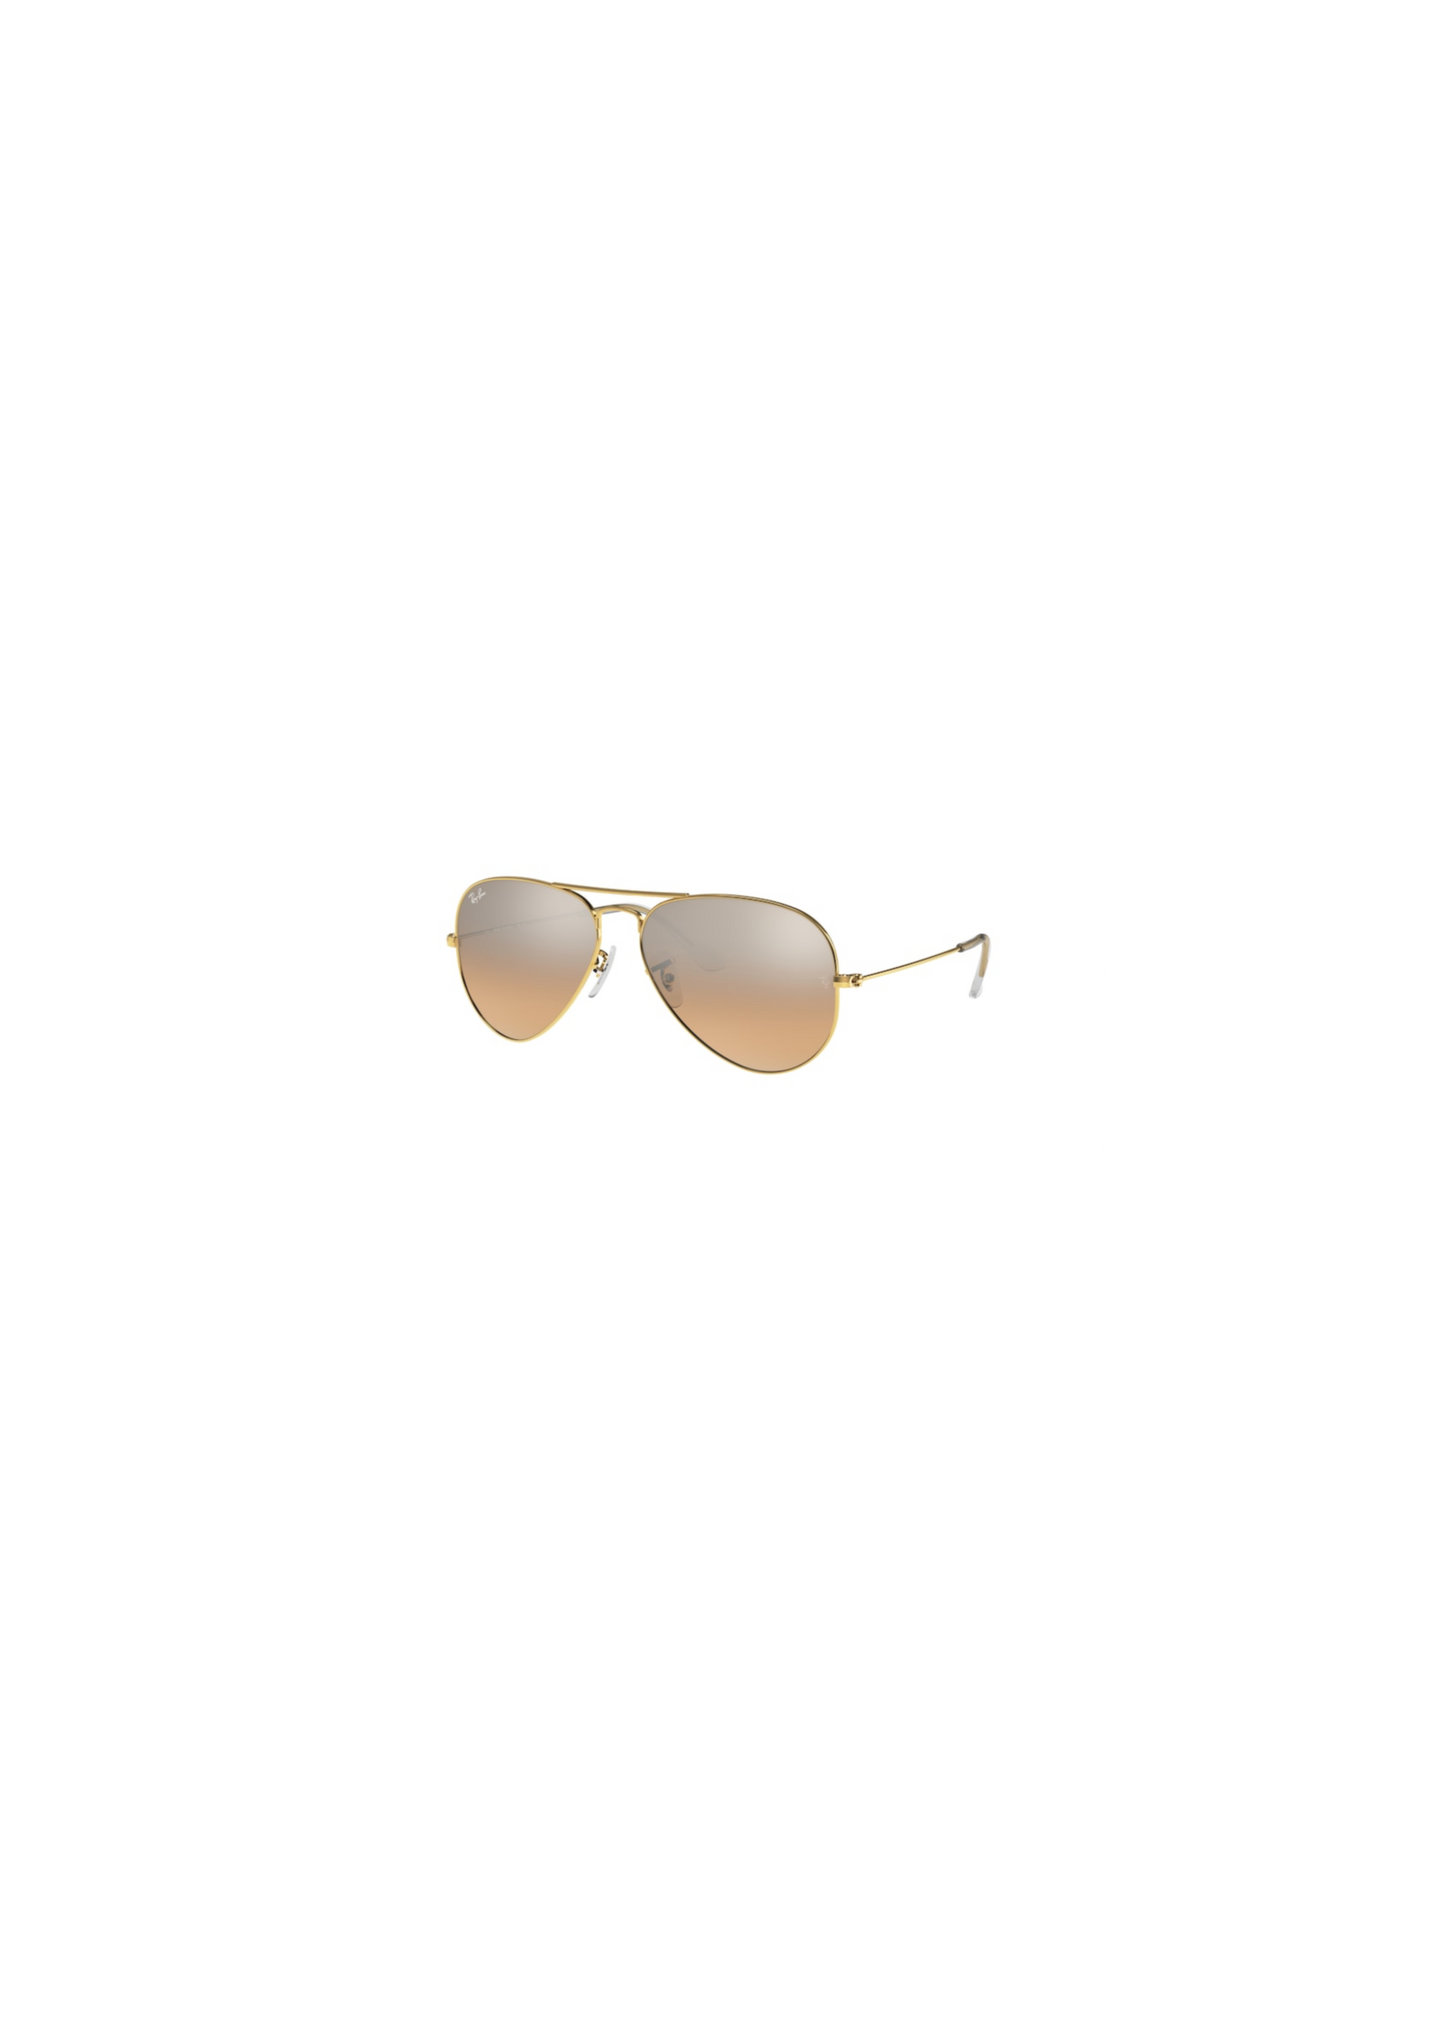 RAY-BAN RB3025  001 3E 58 AVIATOR  Ray Ban Sunglasses. Series Aviator Classic. Series number: RB3025. Color code: 001/3E. Color: Brown. Size: 55-14. Shape: Aviator. Lens Width: 55 mm. Lens Bridge: 14 mm. Arm Length: 135 mm. 100% UV protection. Non-Polarized. Frame Material: Metal. Frame Color: Gold. Lenses Type: Brown B-15. UPC/EAN code: 8052890078456. Ray Ban Aviator Classic Pink  Sunglasses RB3025 001/3E 58.  RAY-BAN RB3025 AVIATOR LARGE METAL